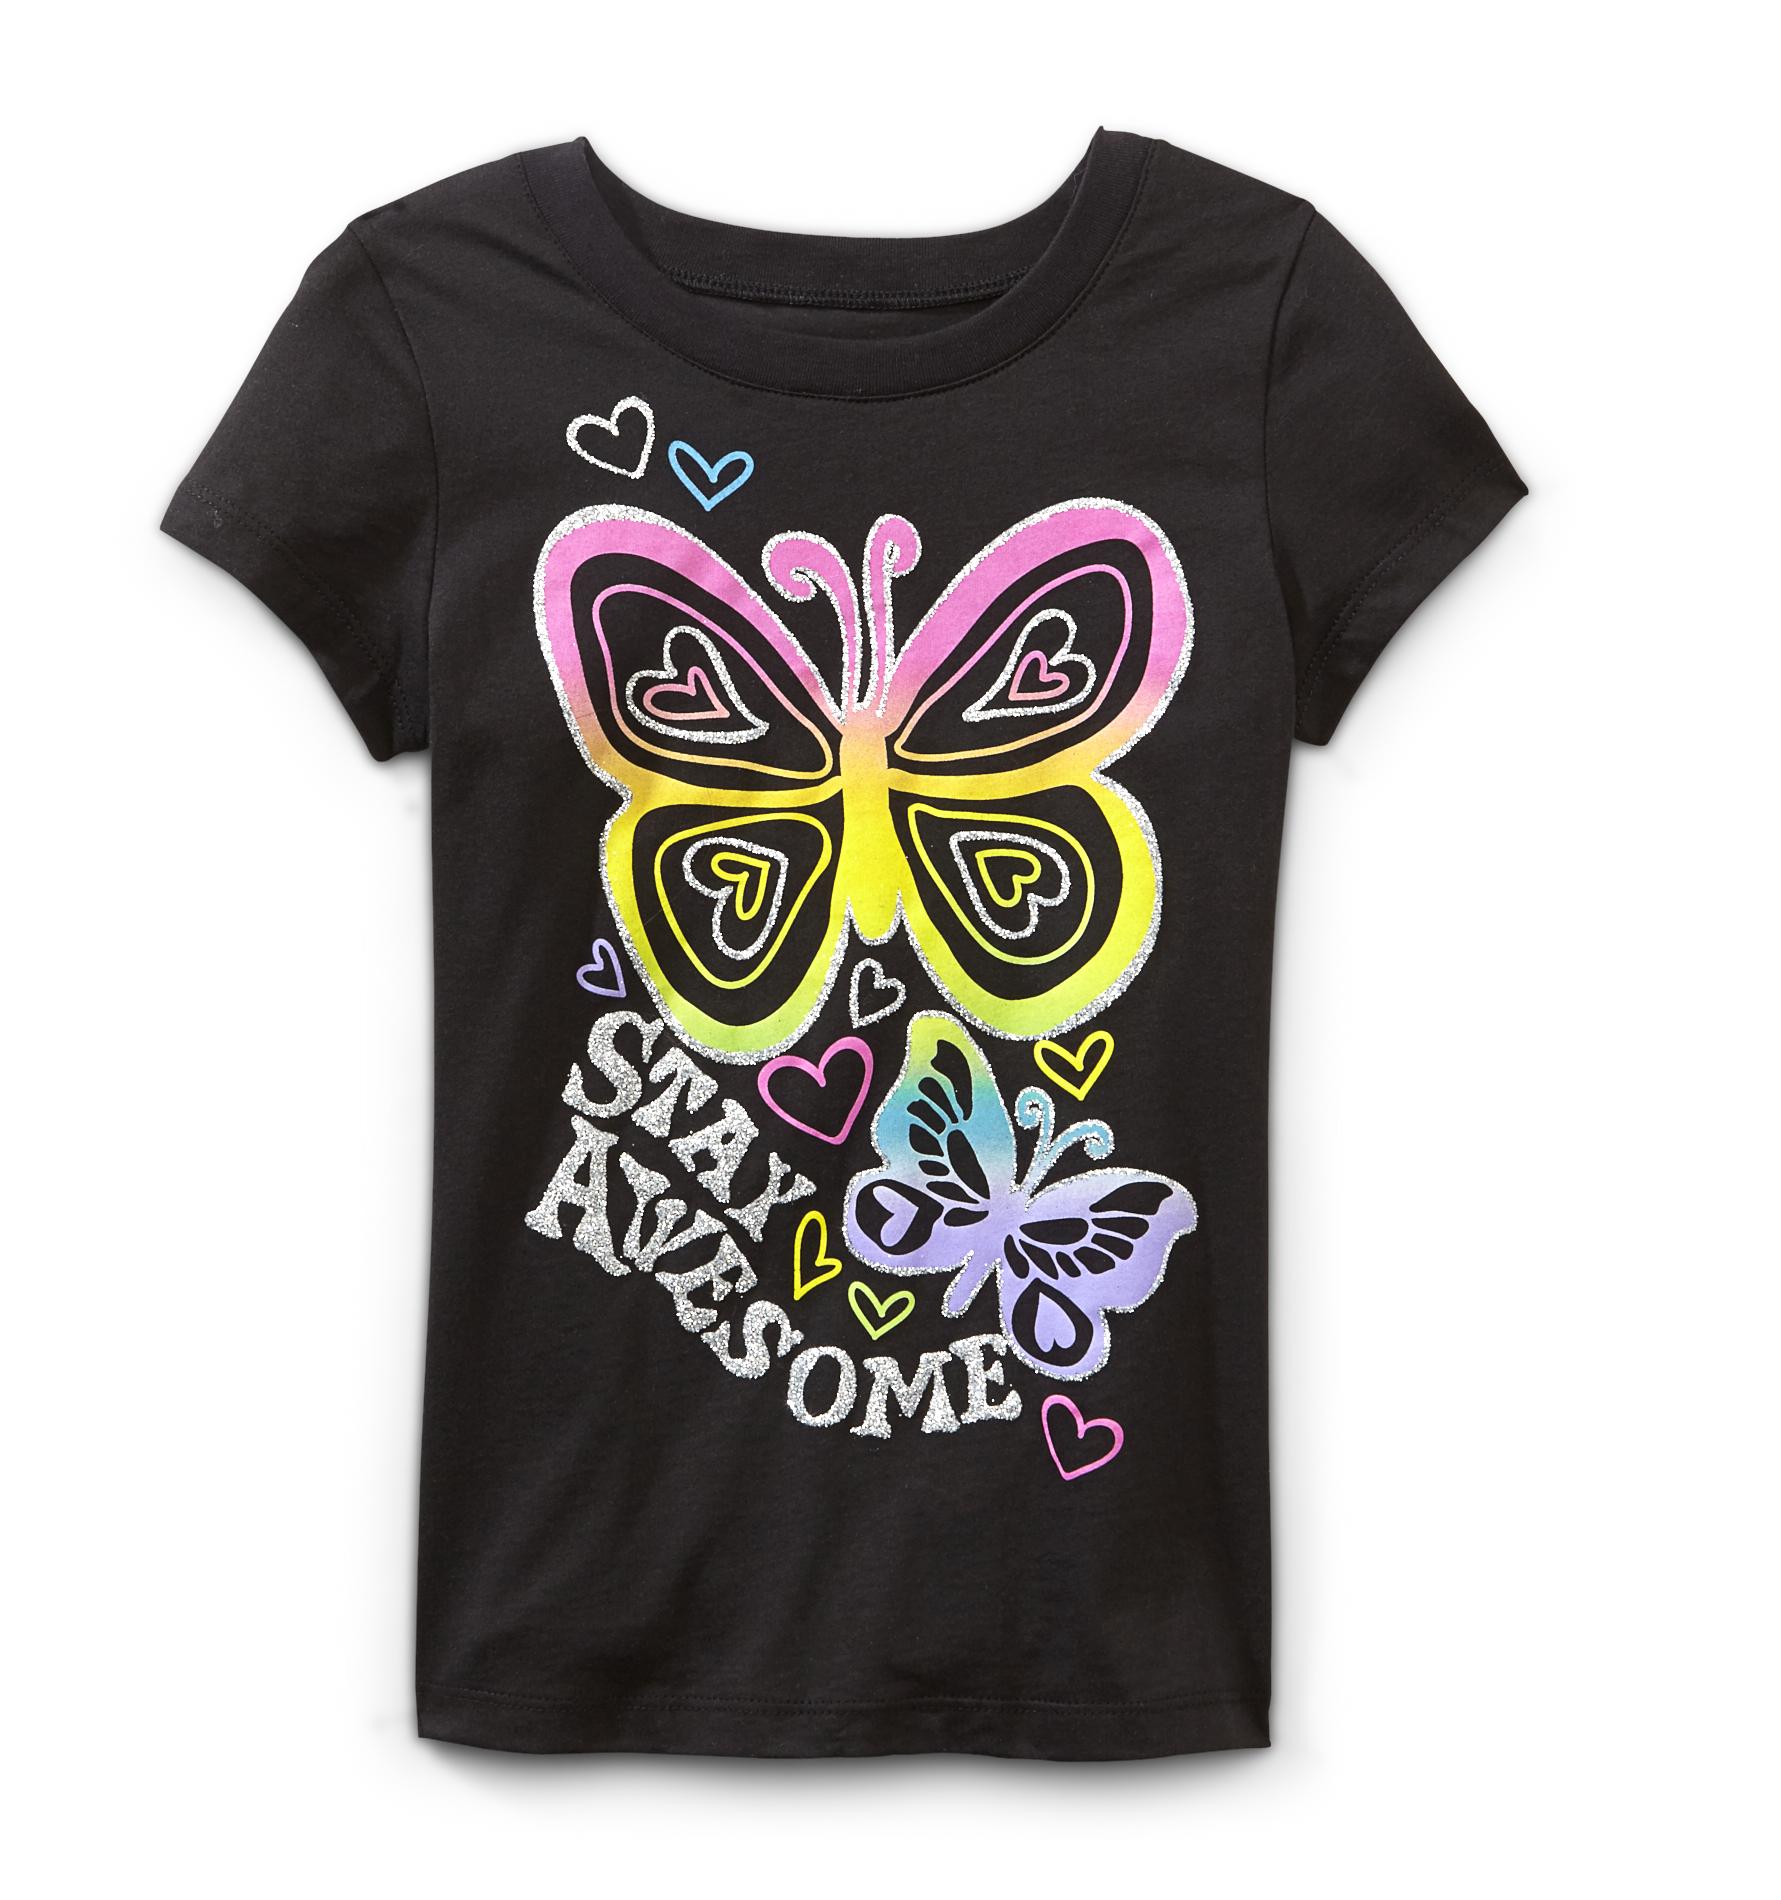 Route 66 Girl's Graphic T-Shirt - Butterflies & Hearts